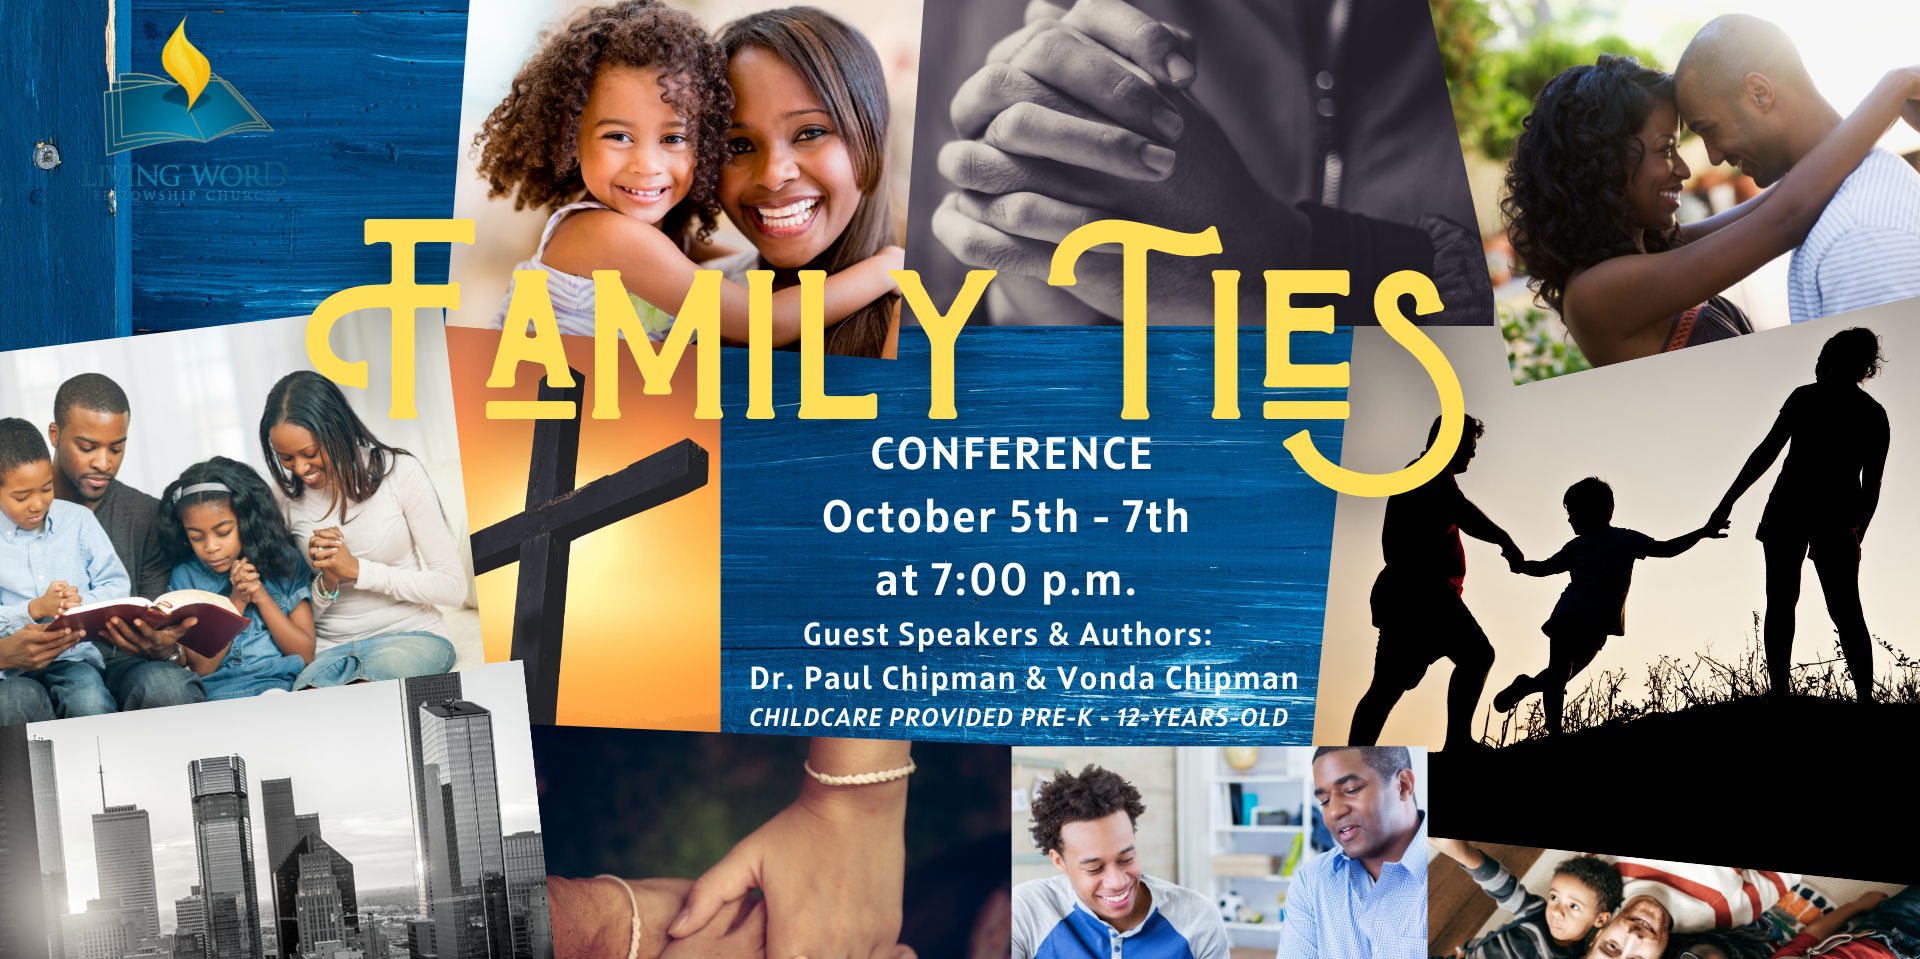 Family Ties Conference promotional image